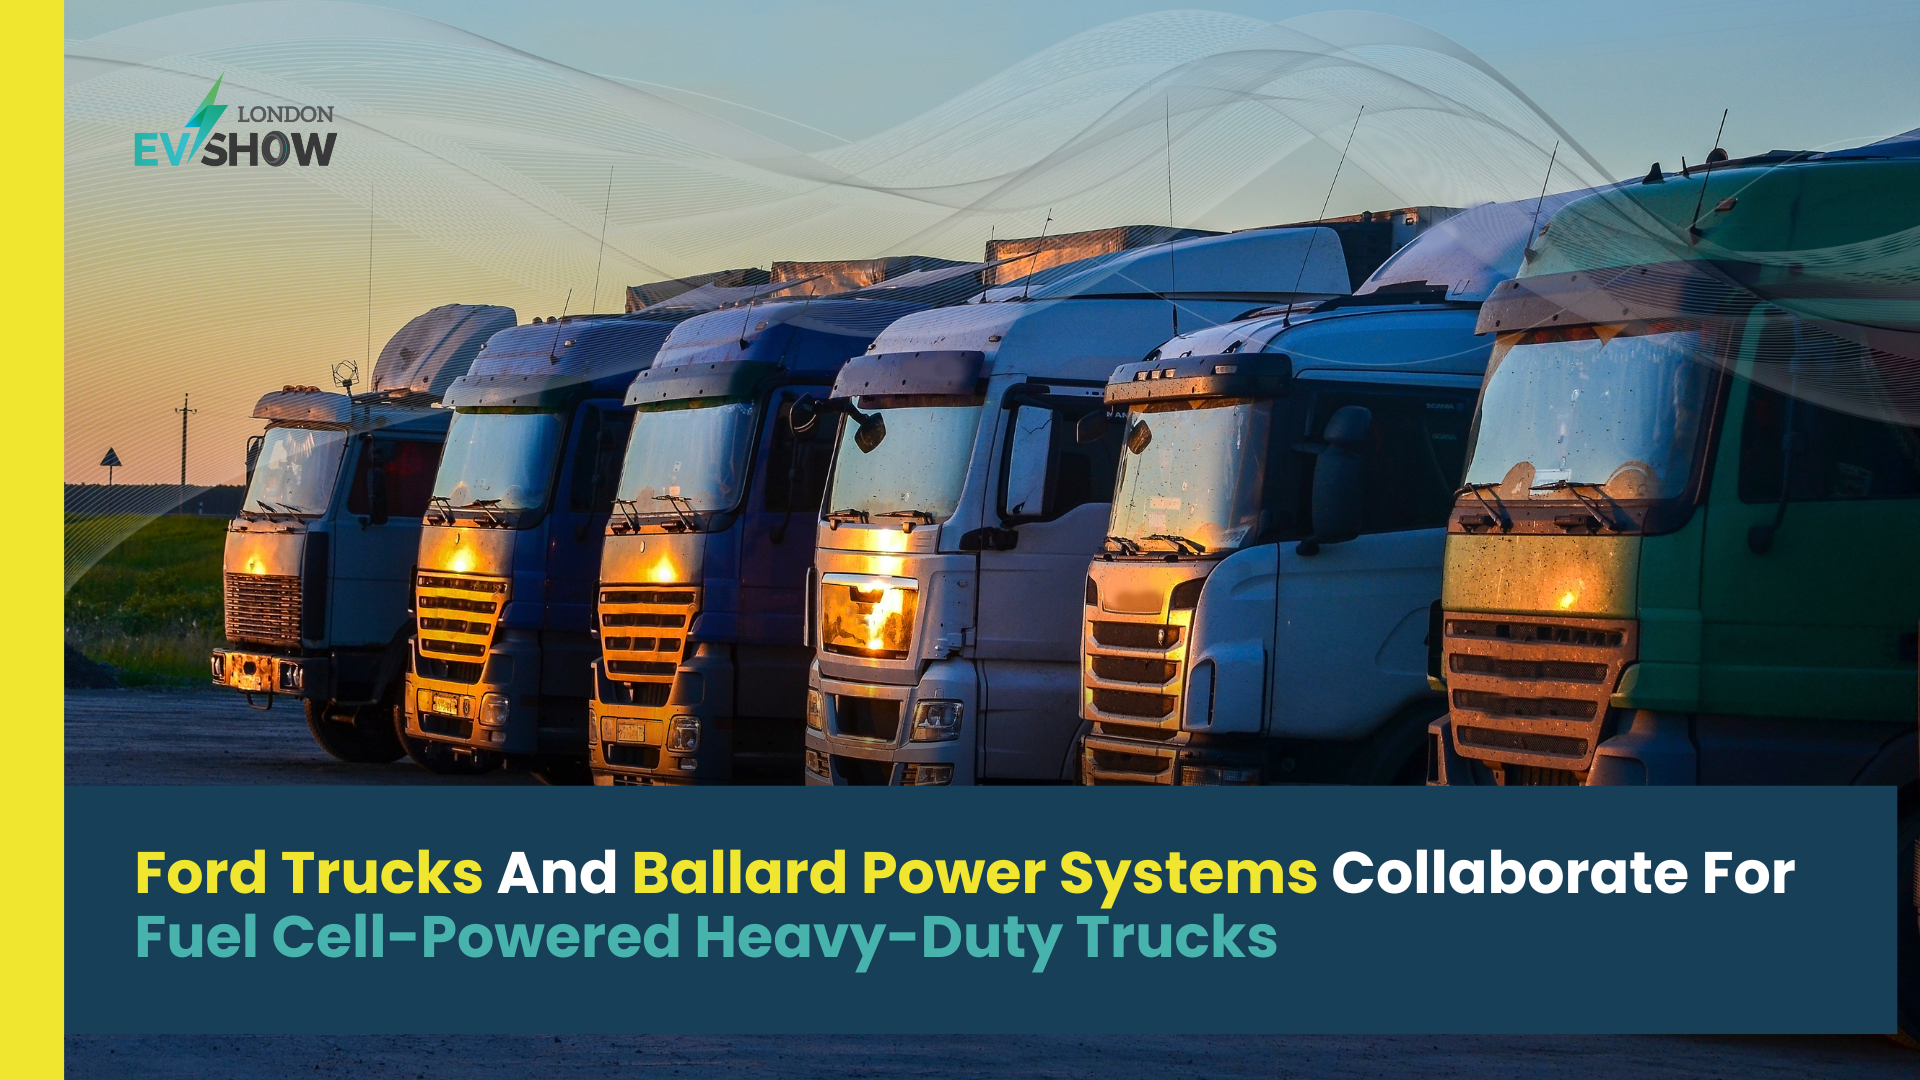 Ford Trucks And Ballard Power Systems Collaborate For Fuel Cell-Powered Heavy-Duty Trucks